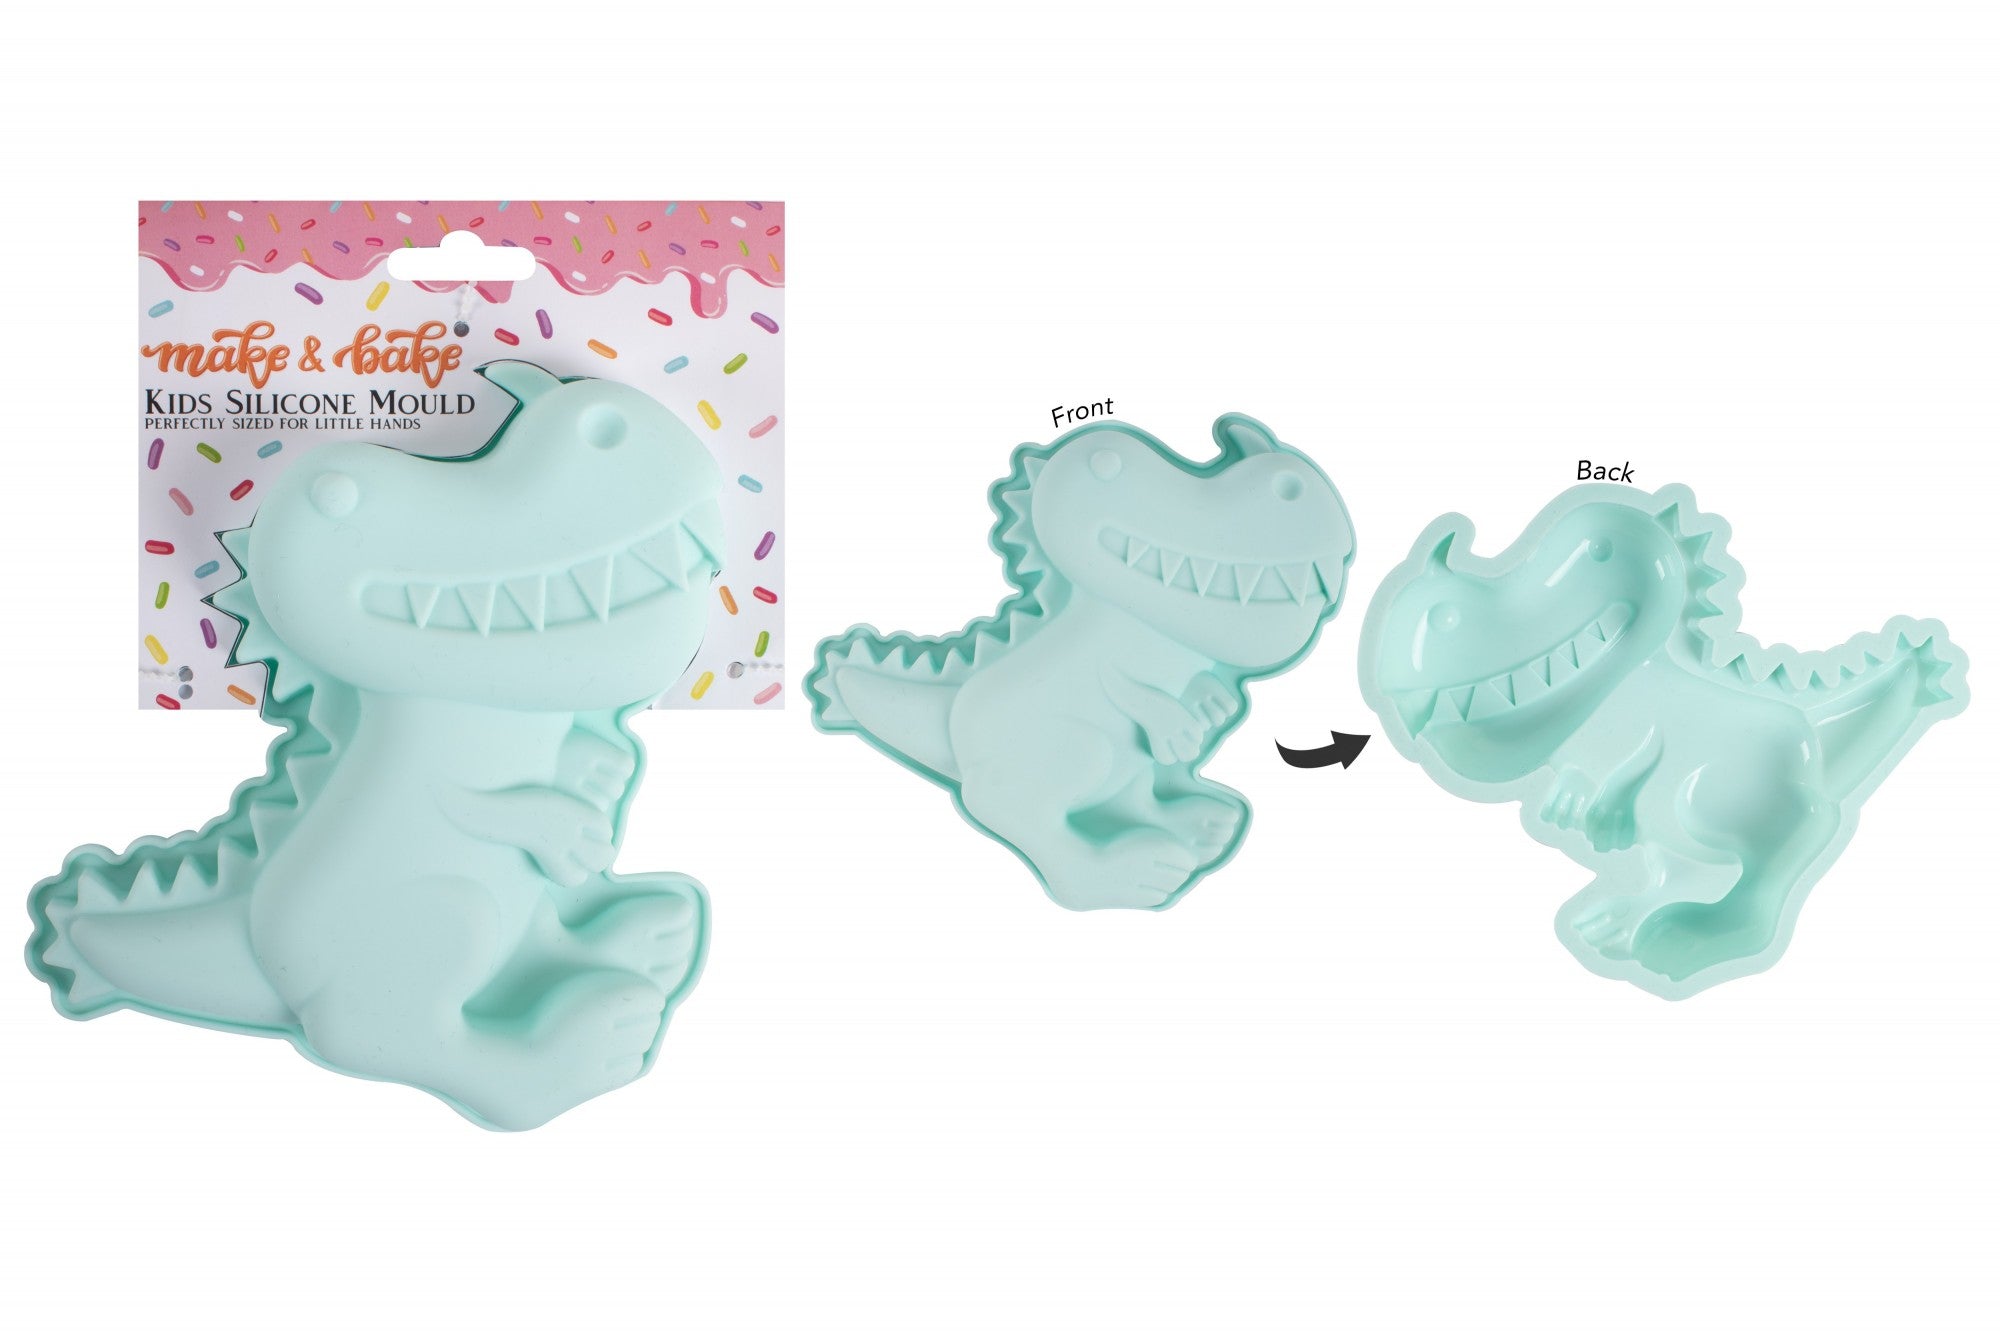 View Kids Dinosaur Silicone Mould information